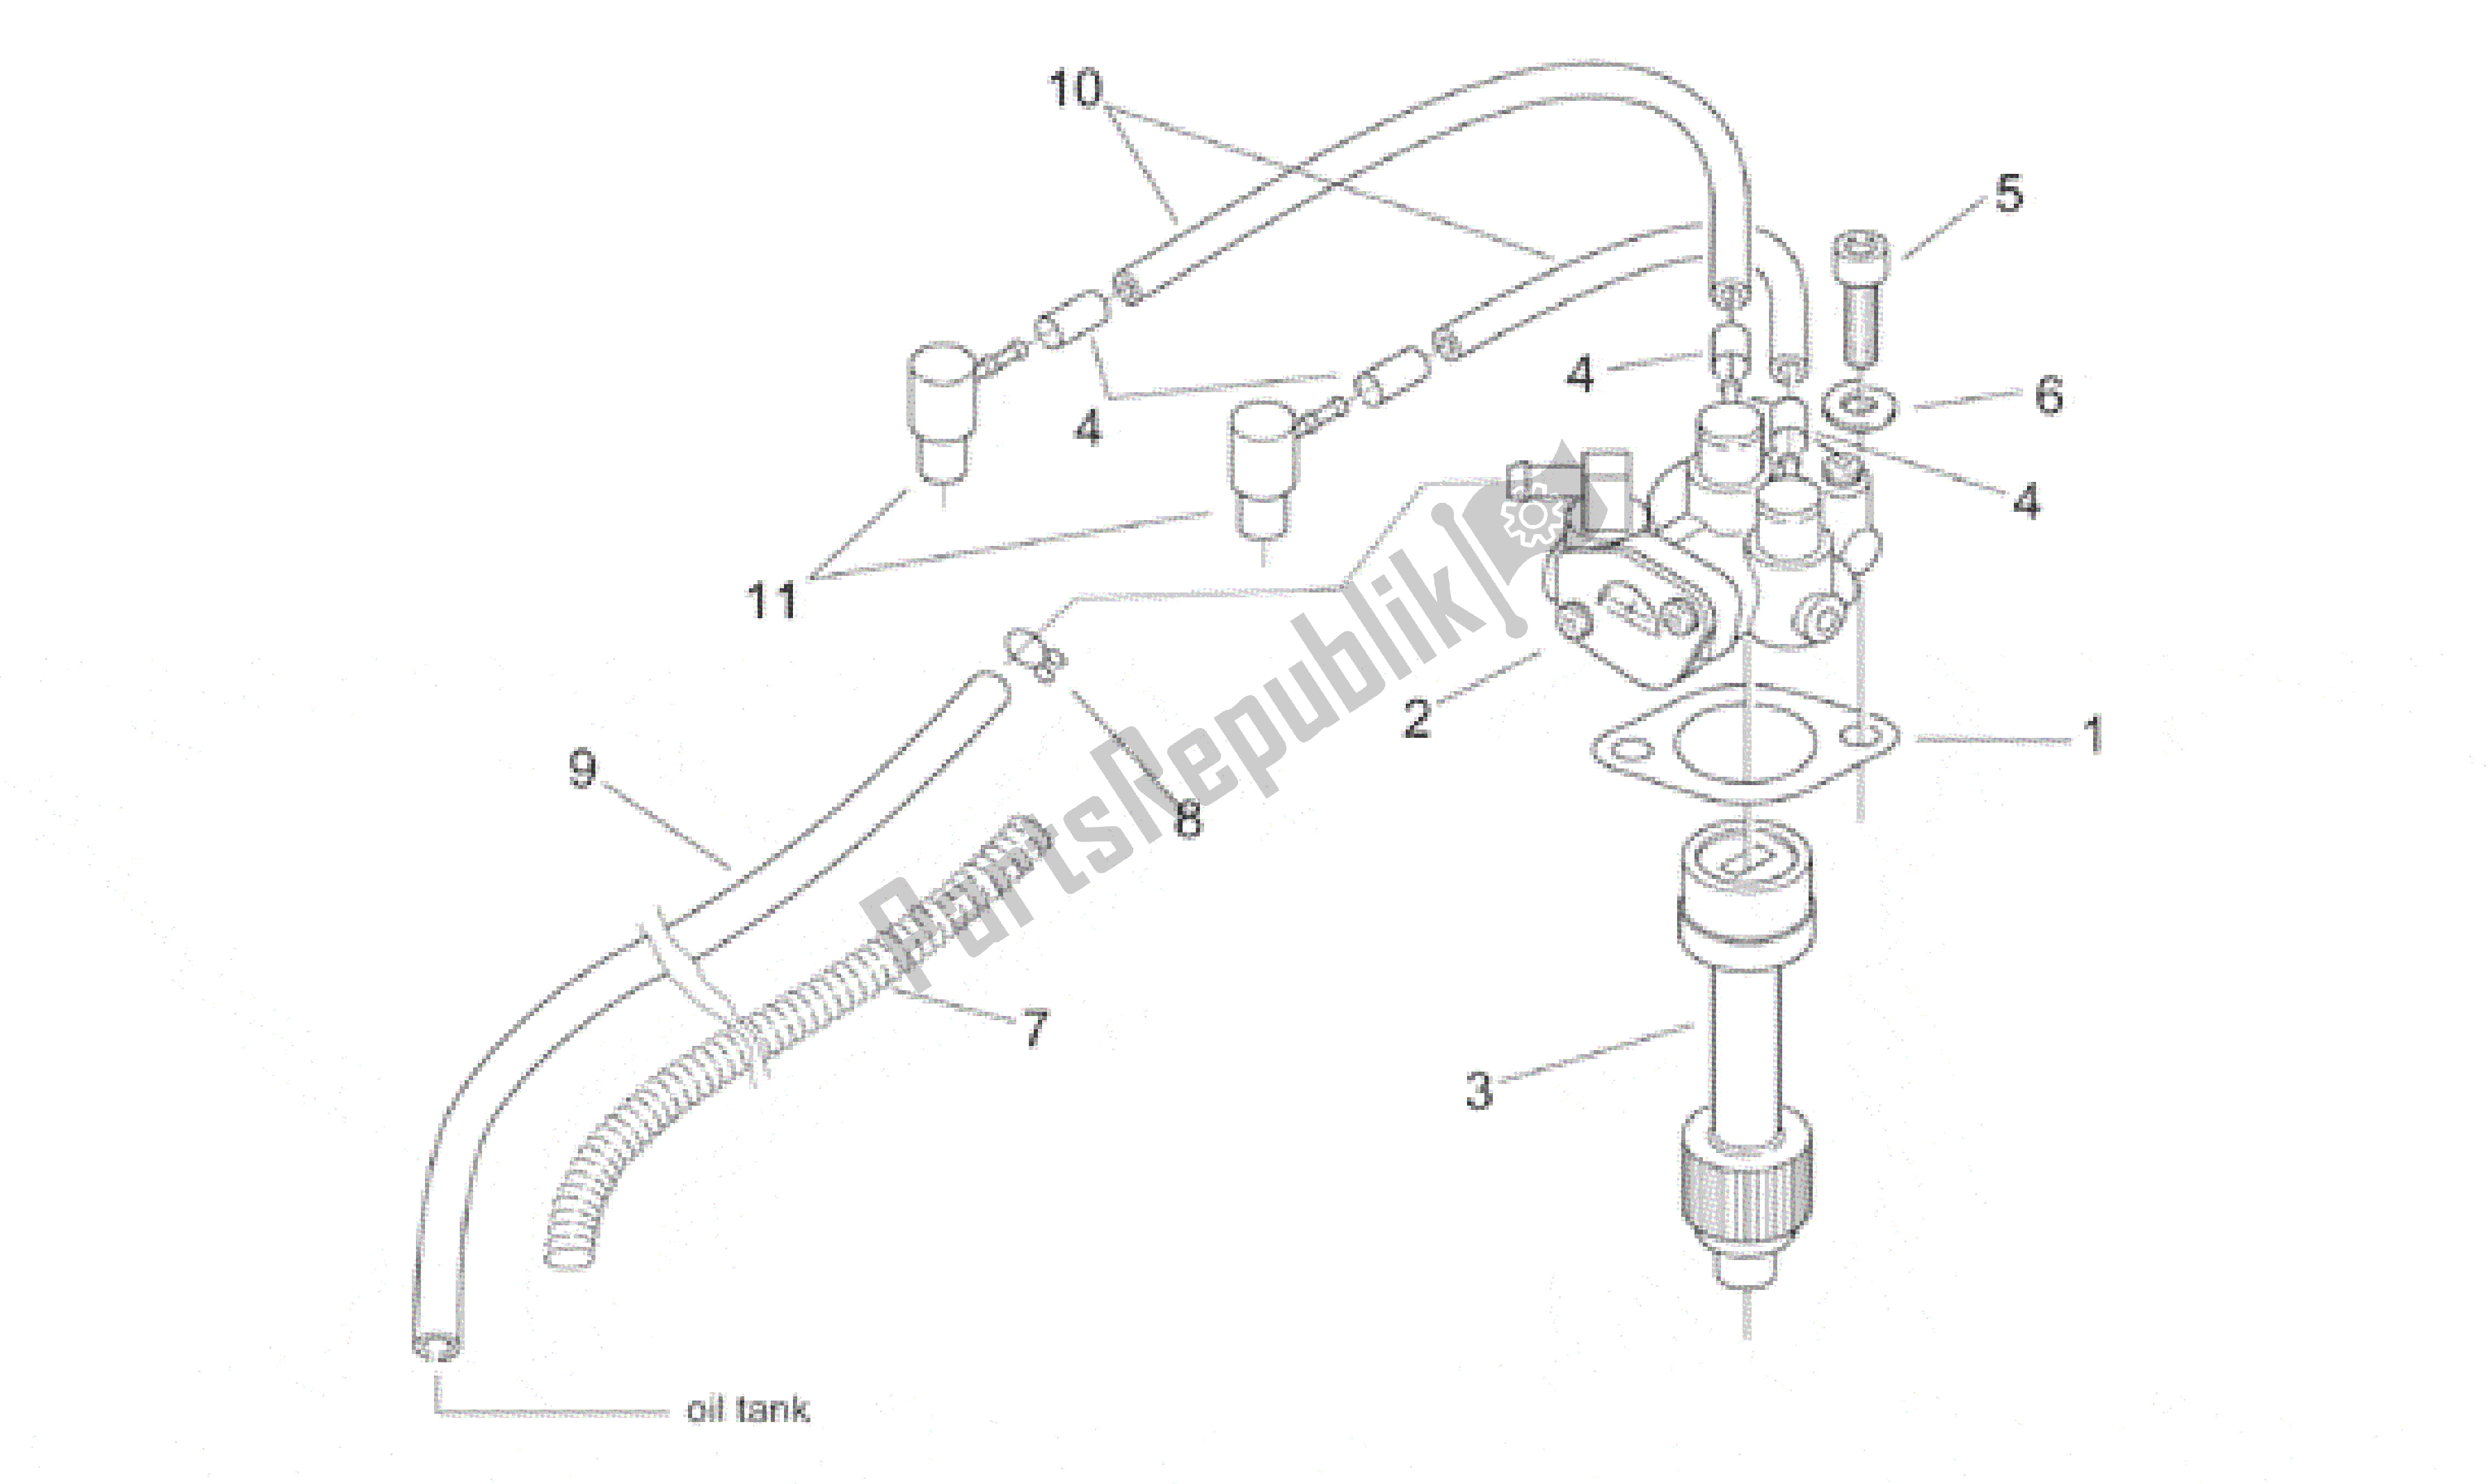 All parts for the Oil Pump of the Aprilia Habana 50 1999 - 2001